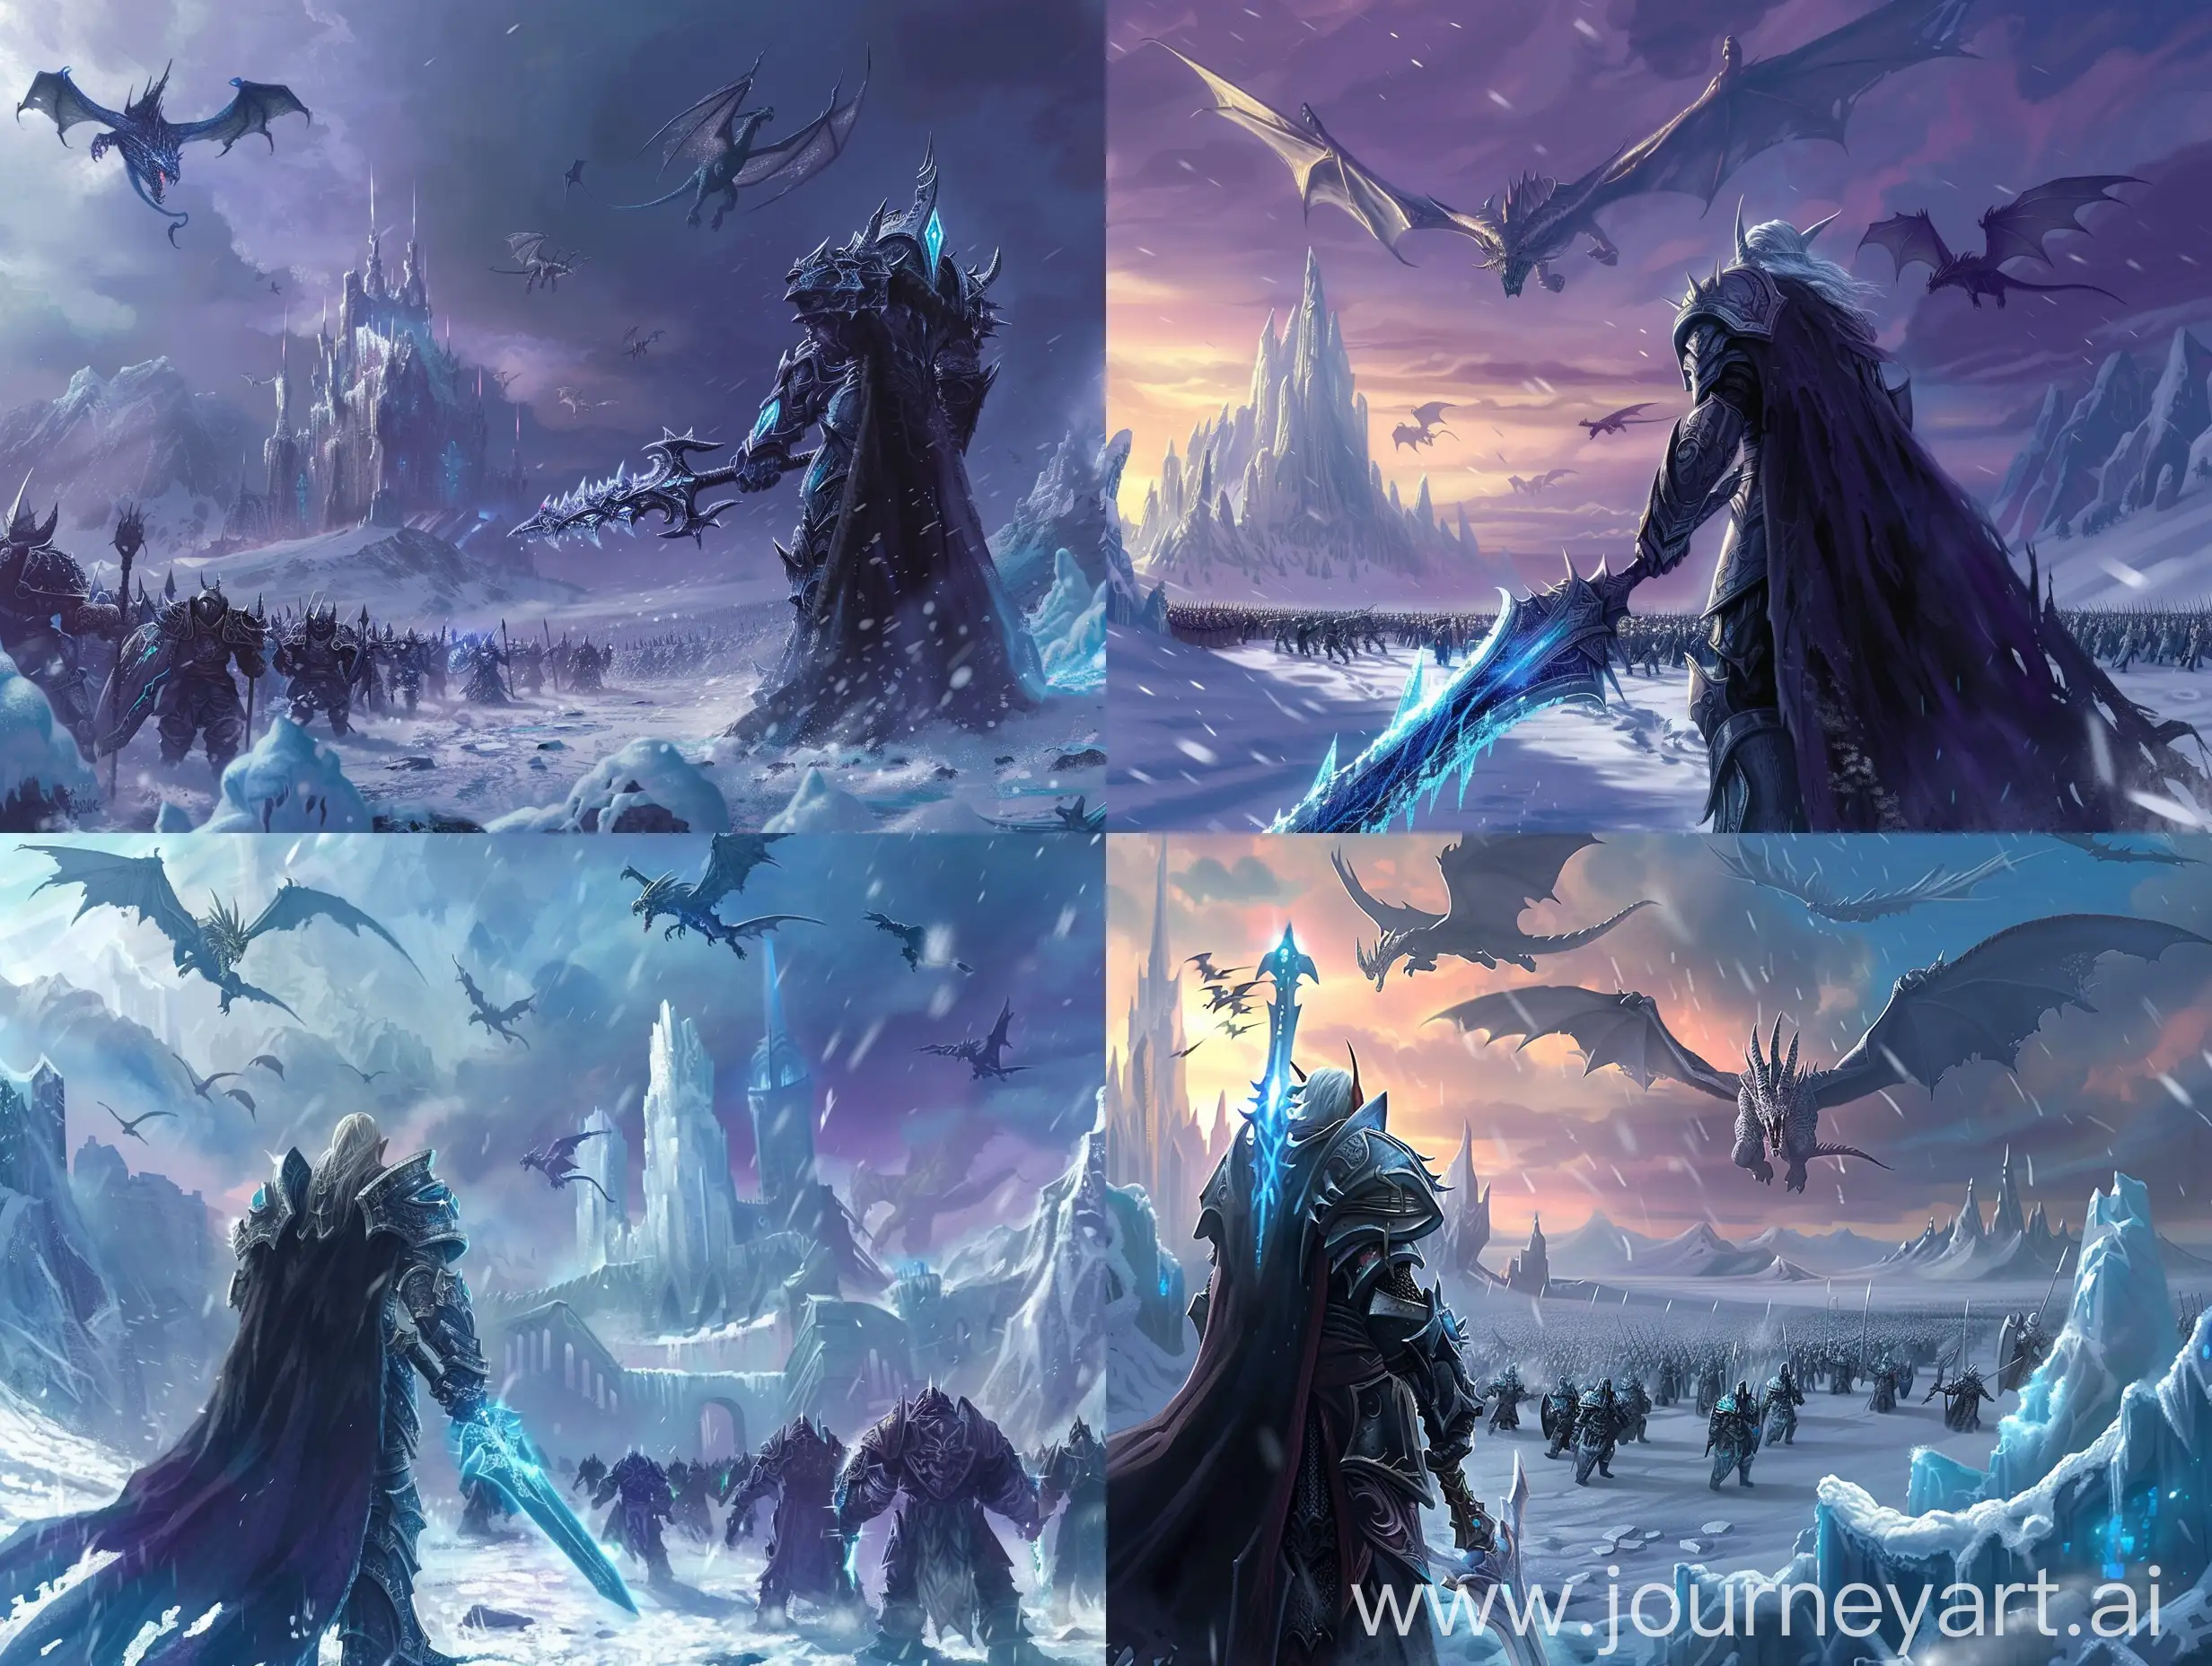 Arthas, wielding Frostmourne, stands in Icecrown Citadel, facing the armies of the Alliance and the Horde alone, with frost dragons soaring in the sky.